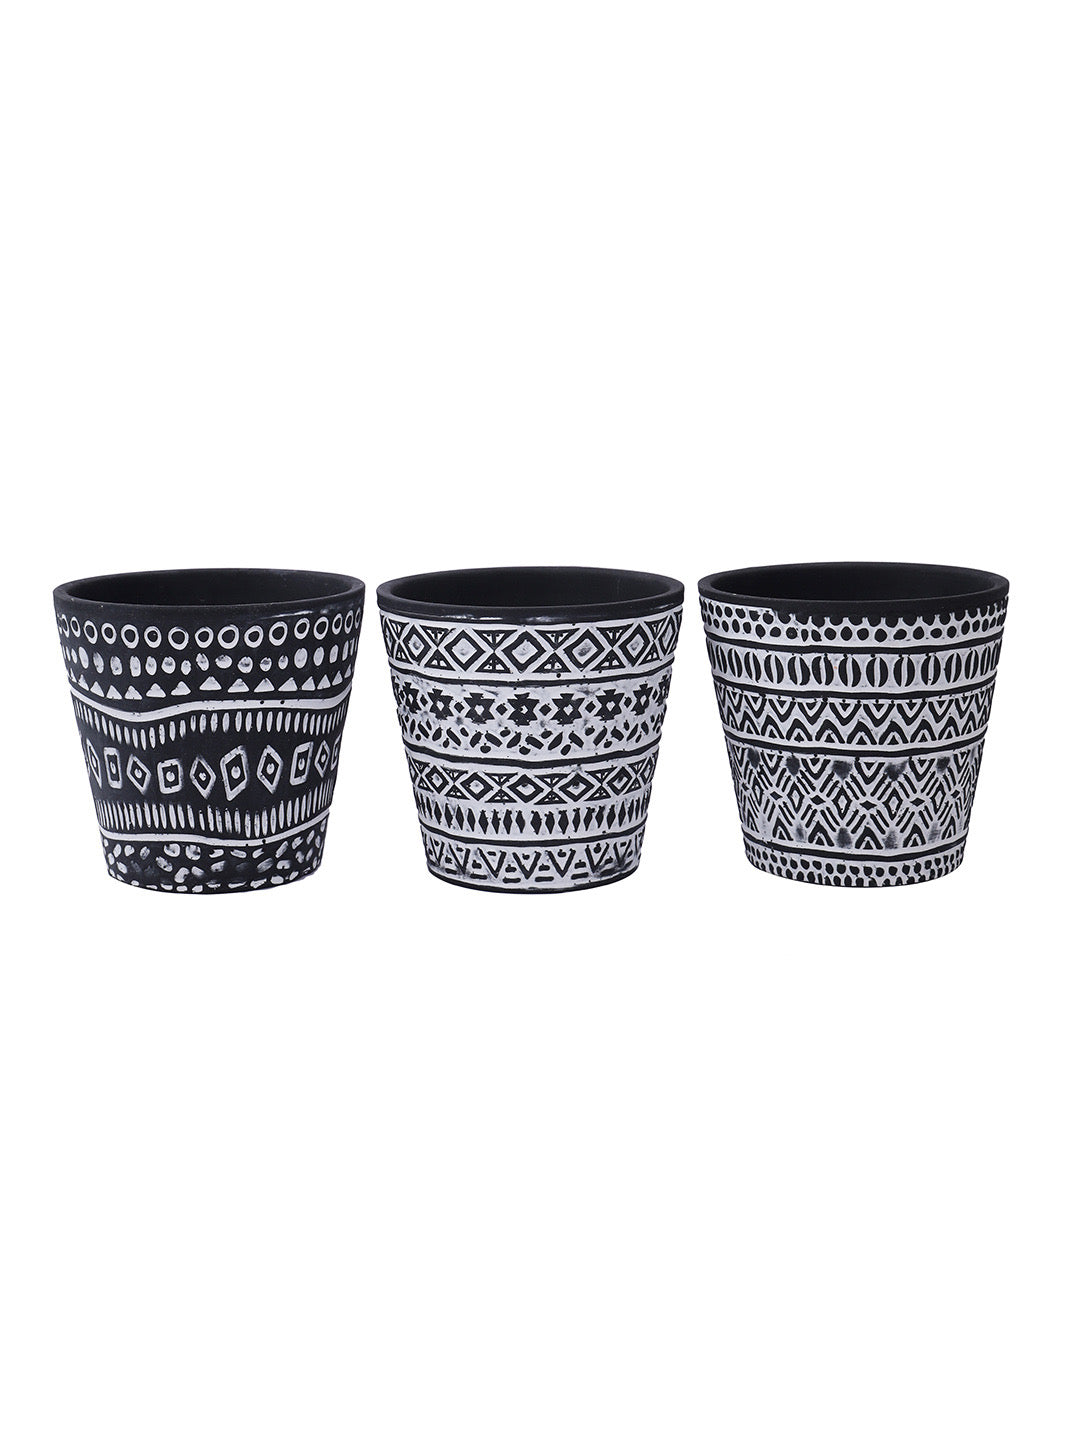 Set of 3 Black colored Planters with white tribal design - Default Title (CH210112_3)